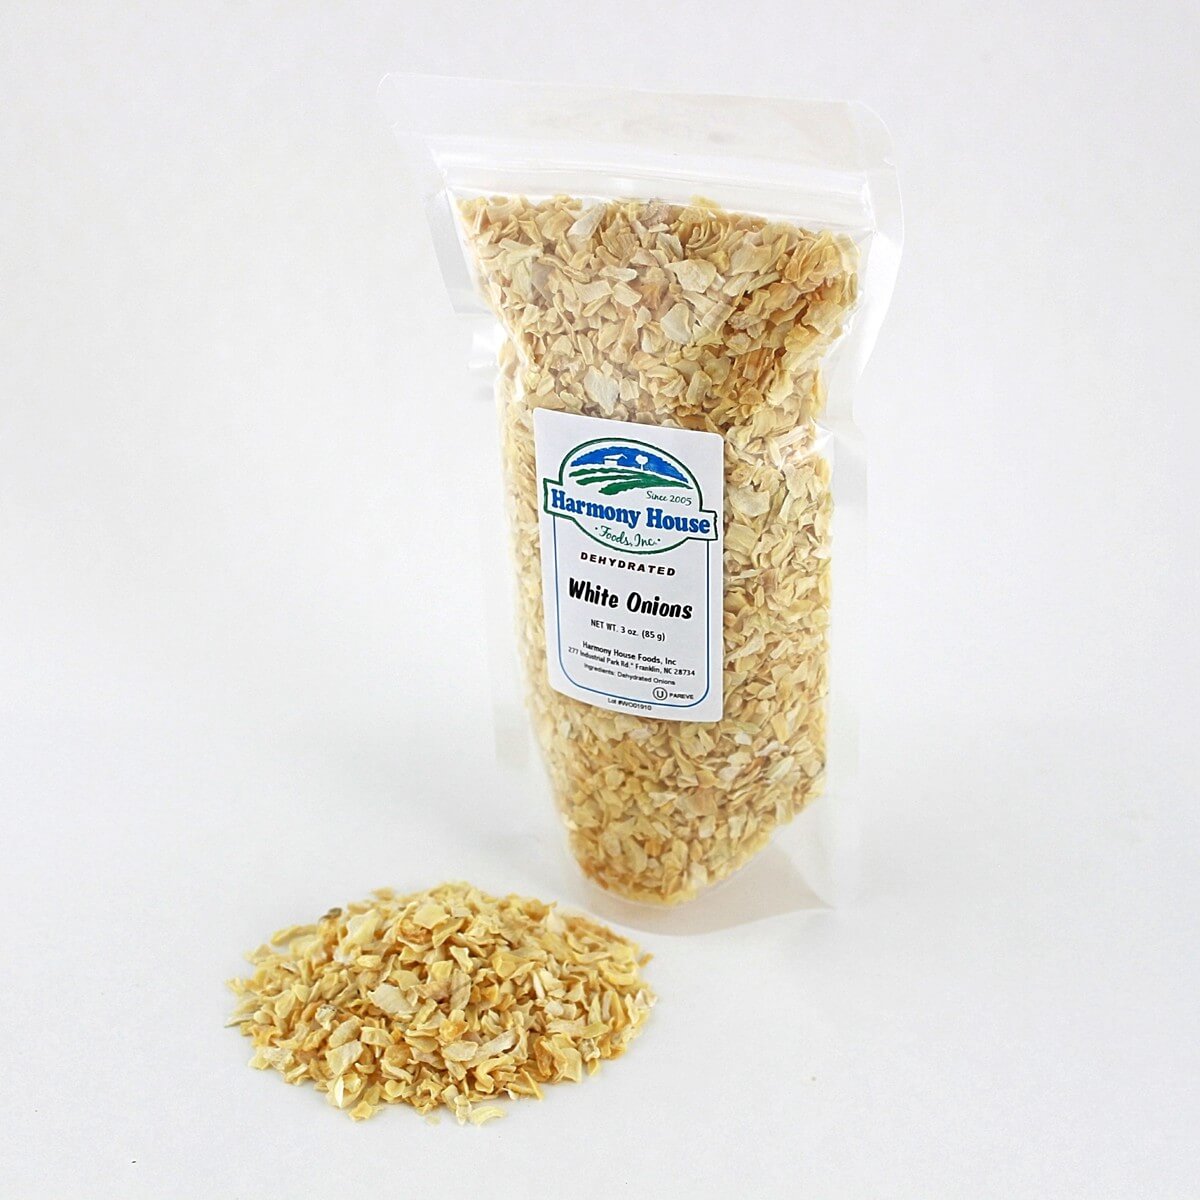 A bag of rolled oats on a white surface, Harmony House Dried Onions.